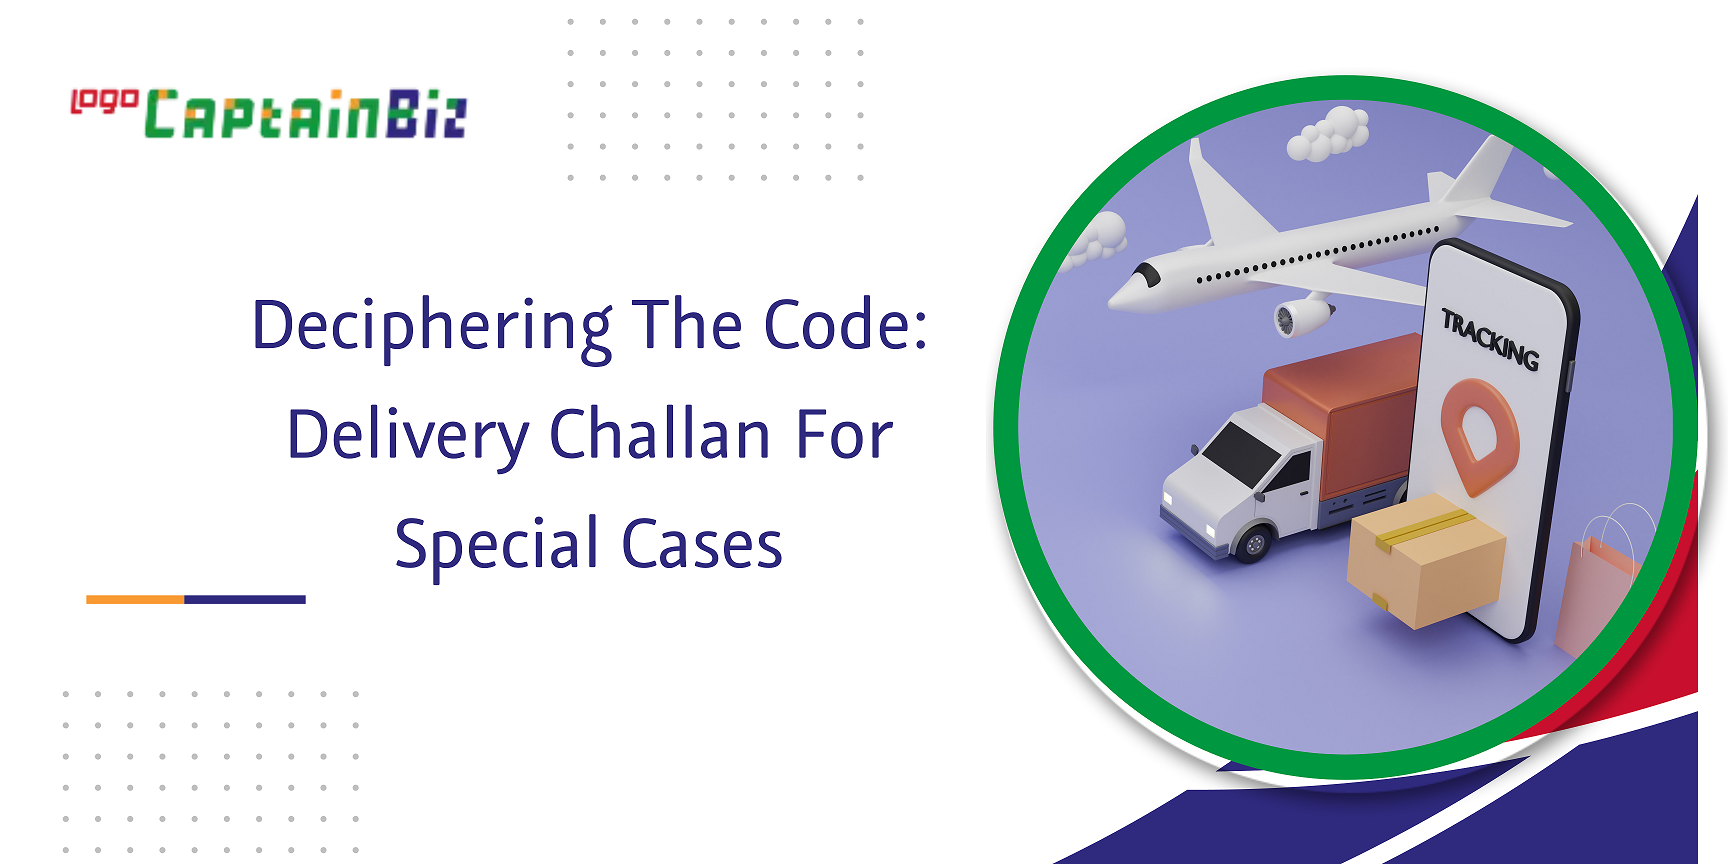 CaptainBiz: deciphering the code delivery challan for special cases